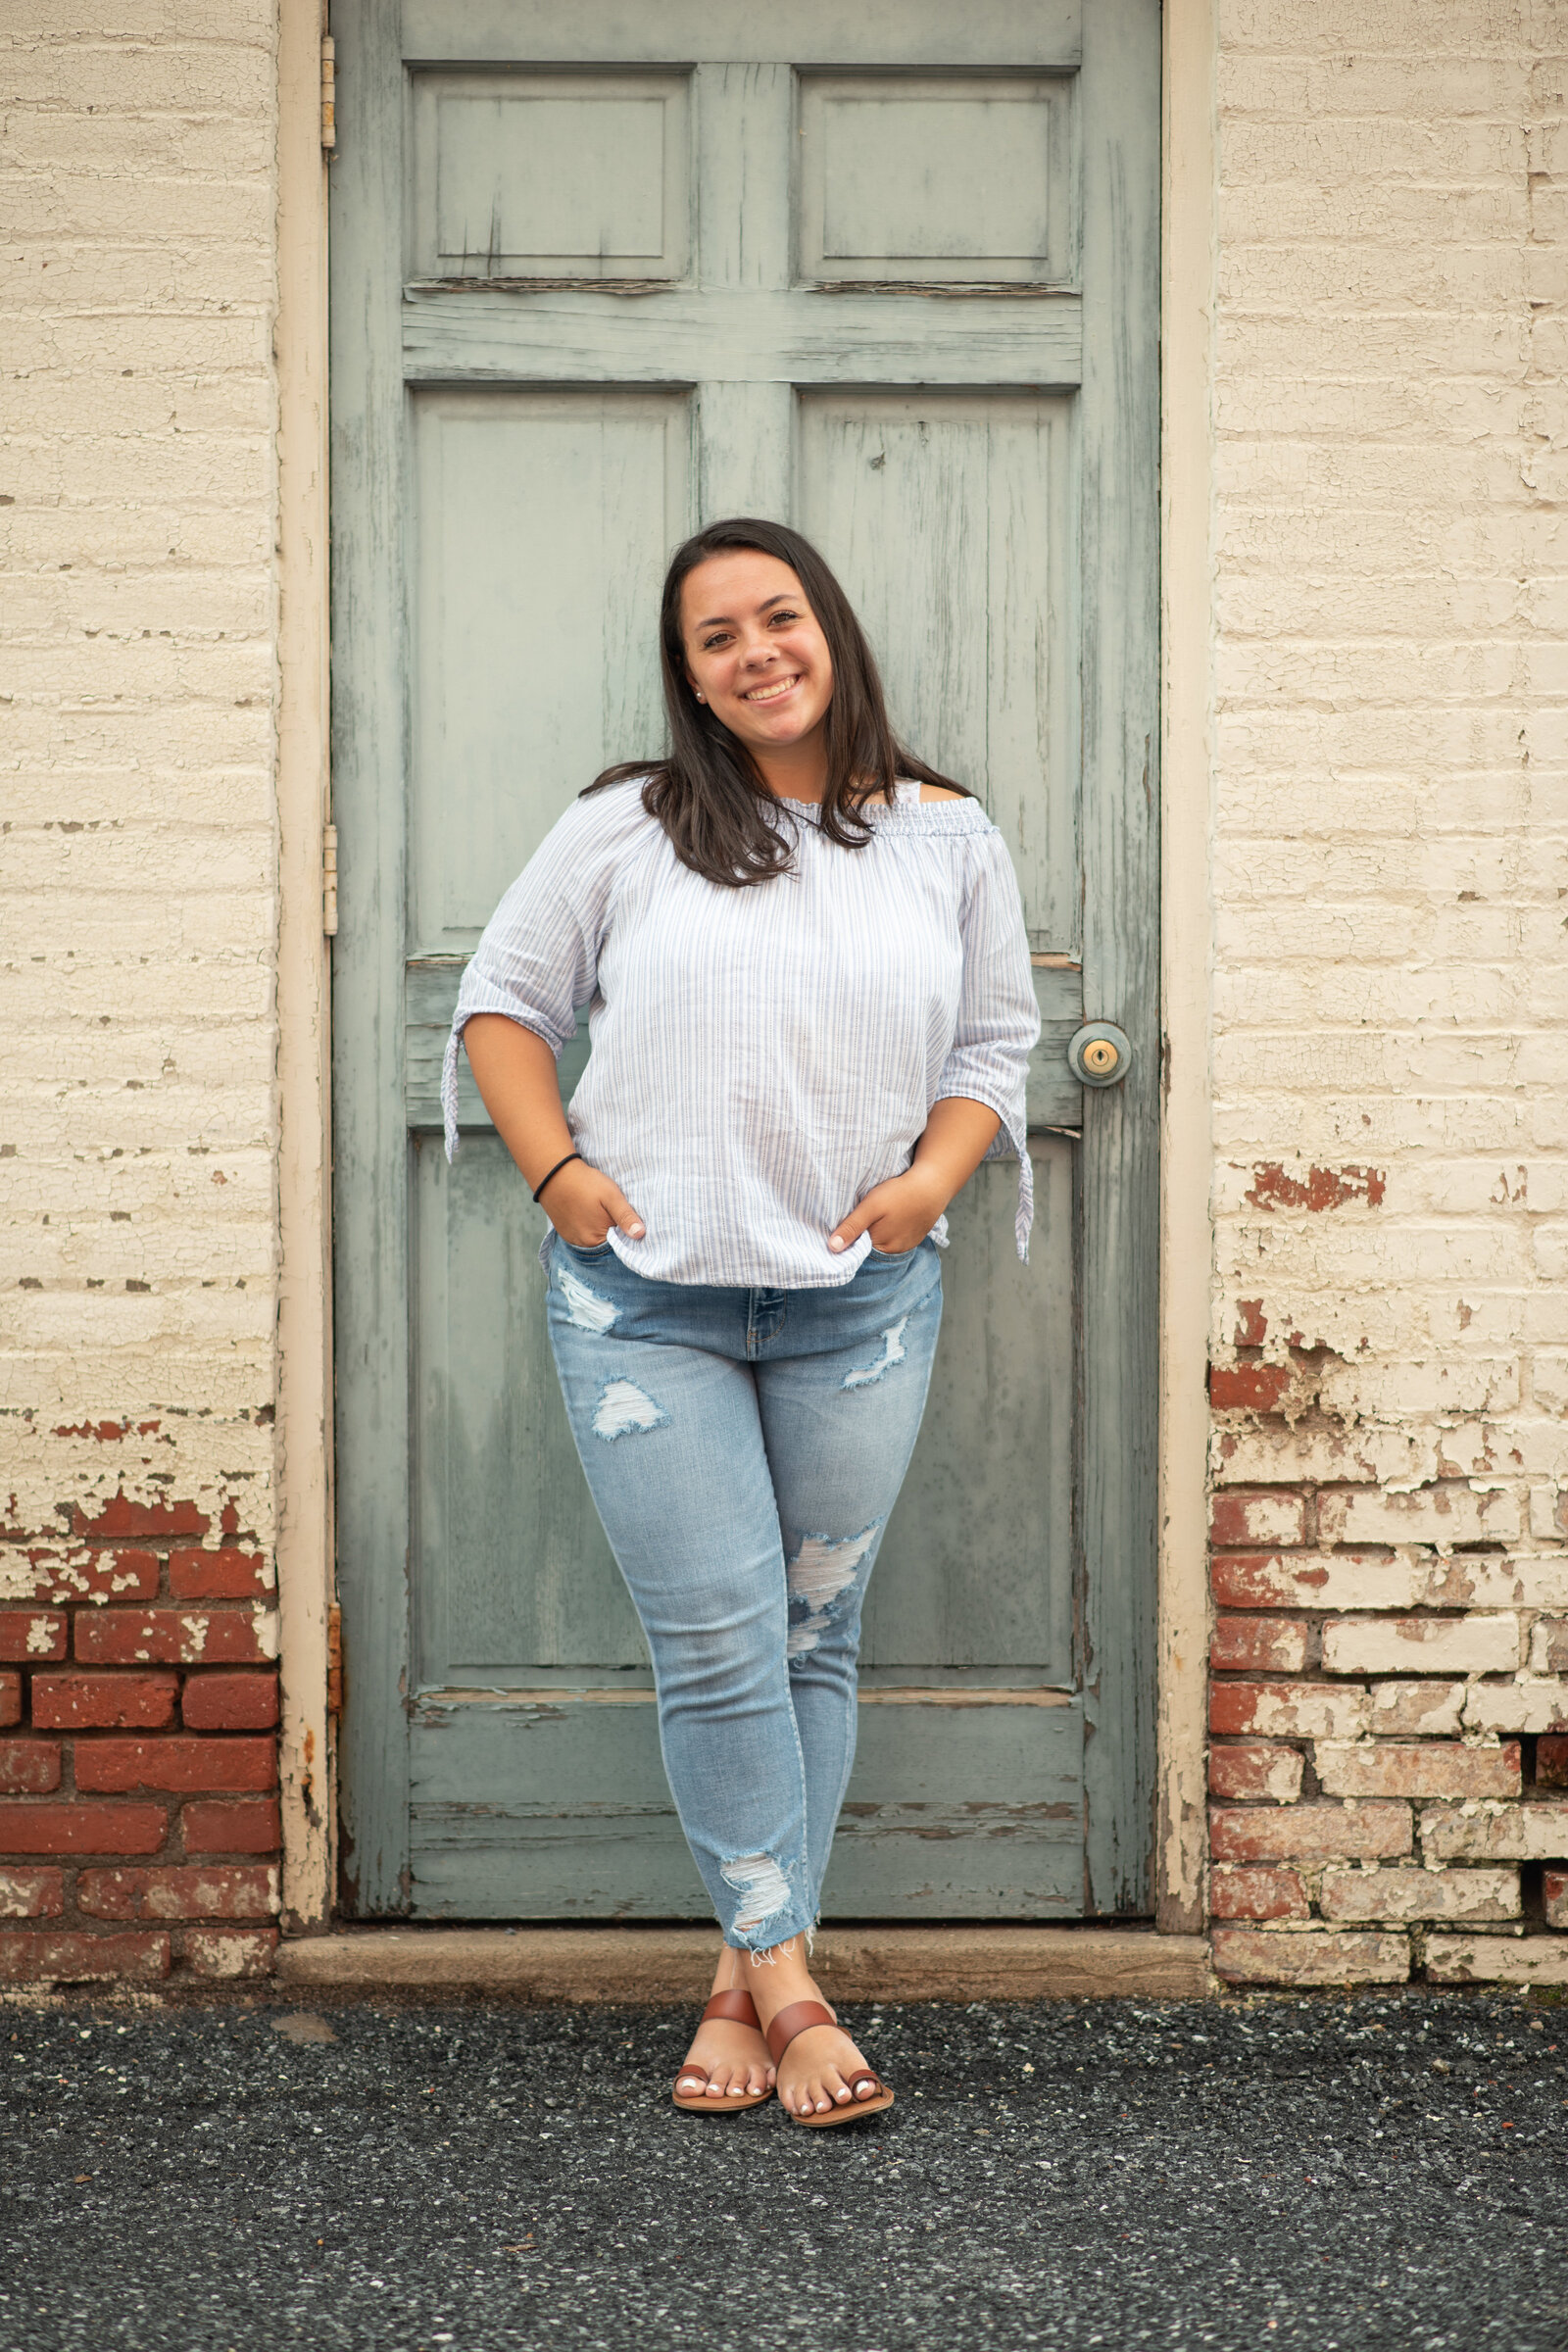 Senior girl in jeans in front of distressed door and brick wall